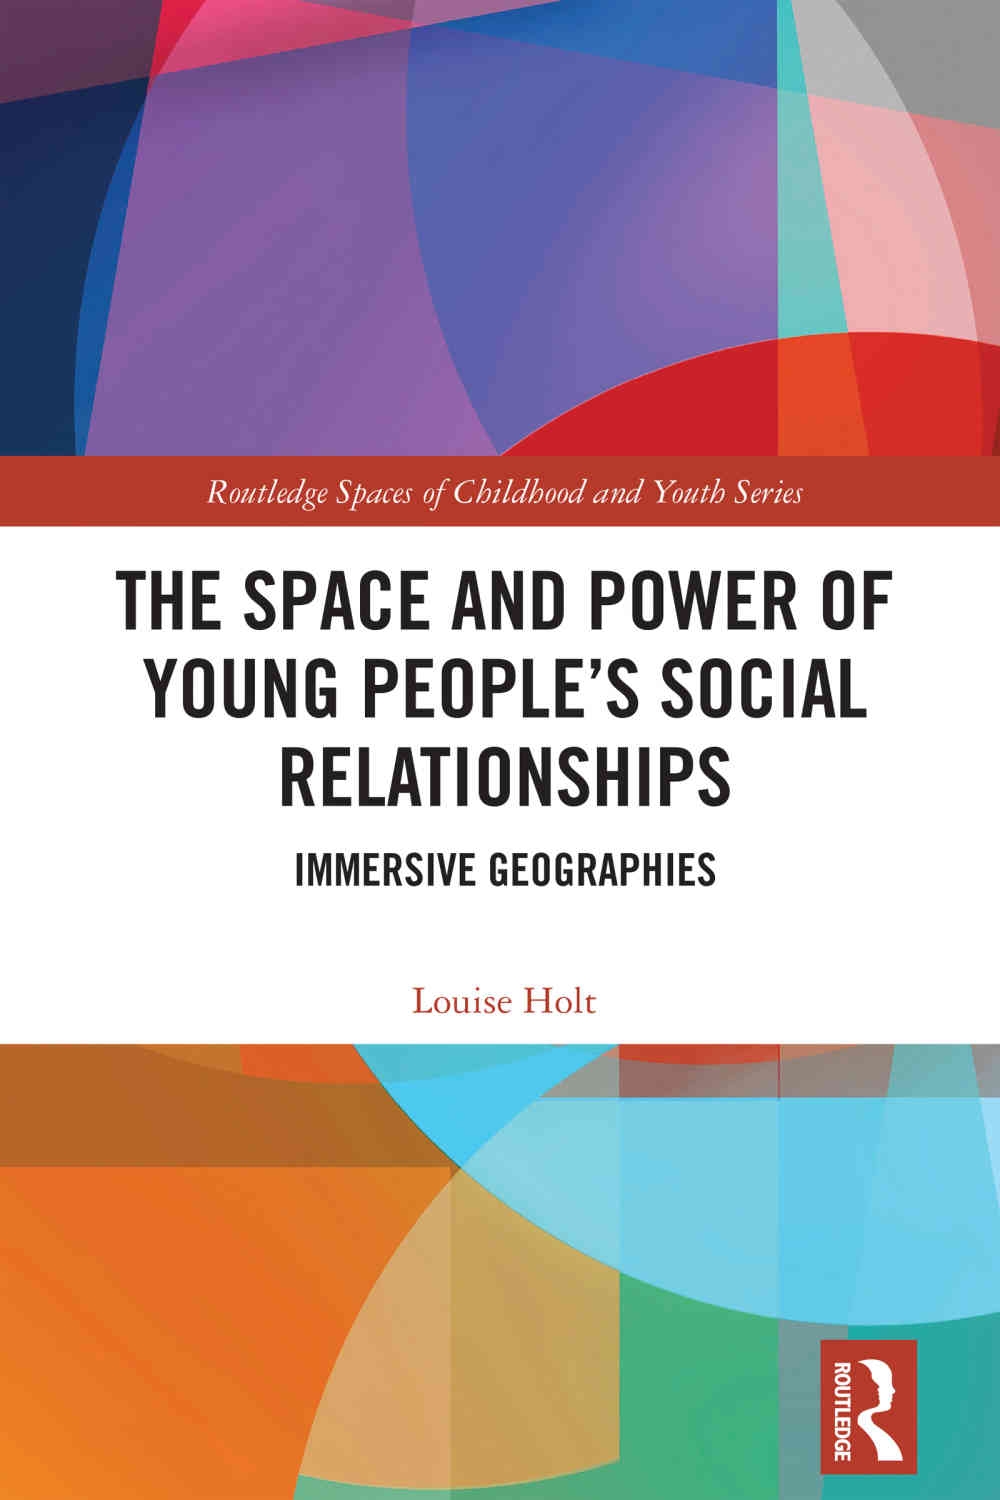 The Space and Power of Young People’s Social Relationships: Geographies of Immersion